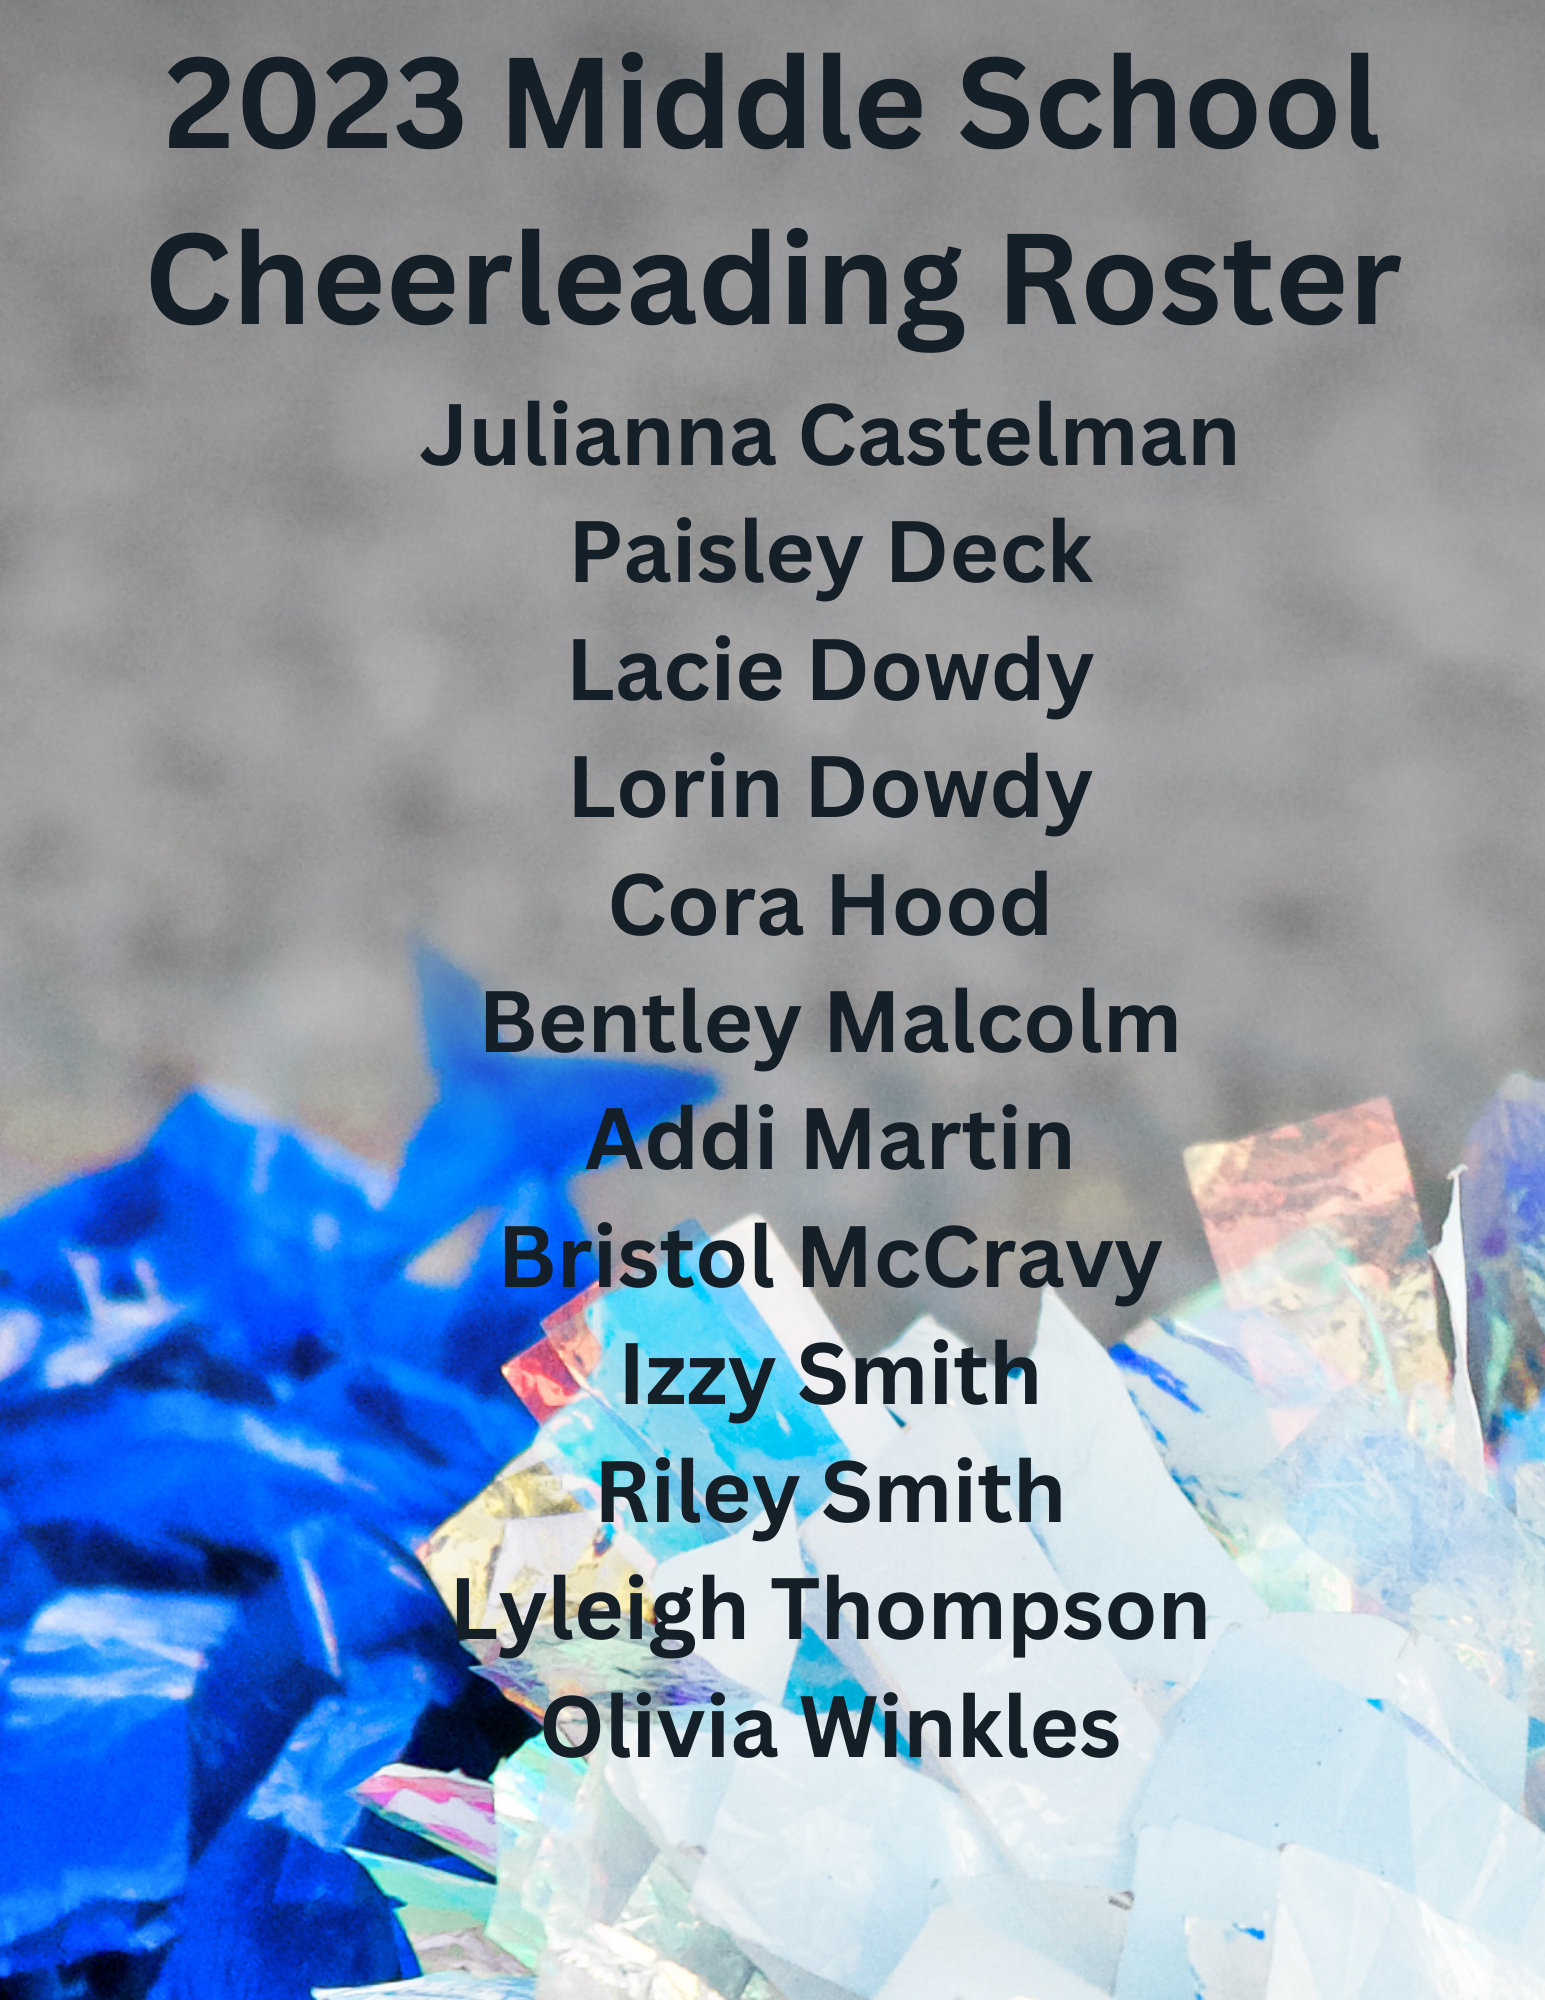 a poster for the 2023 middle school cheerleading roster